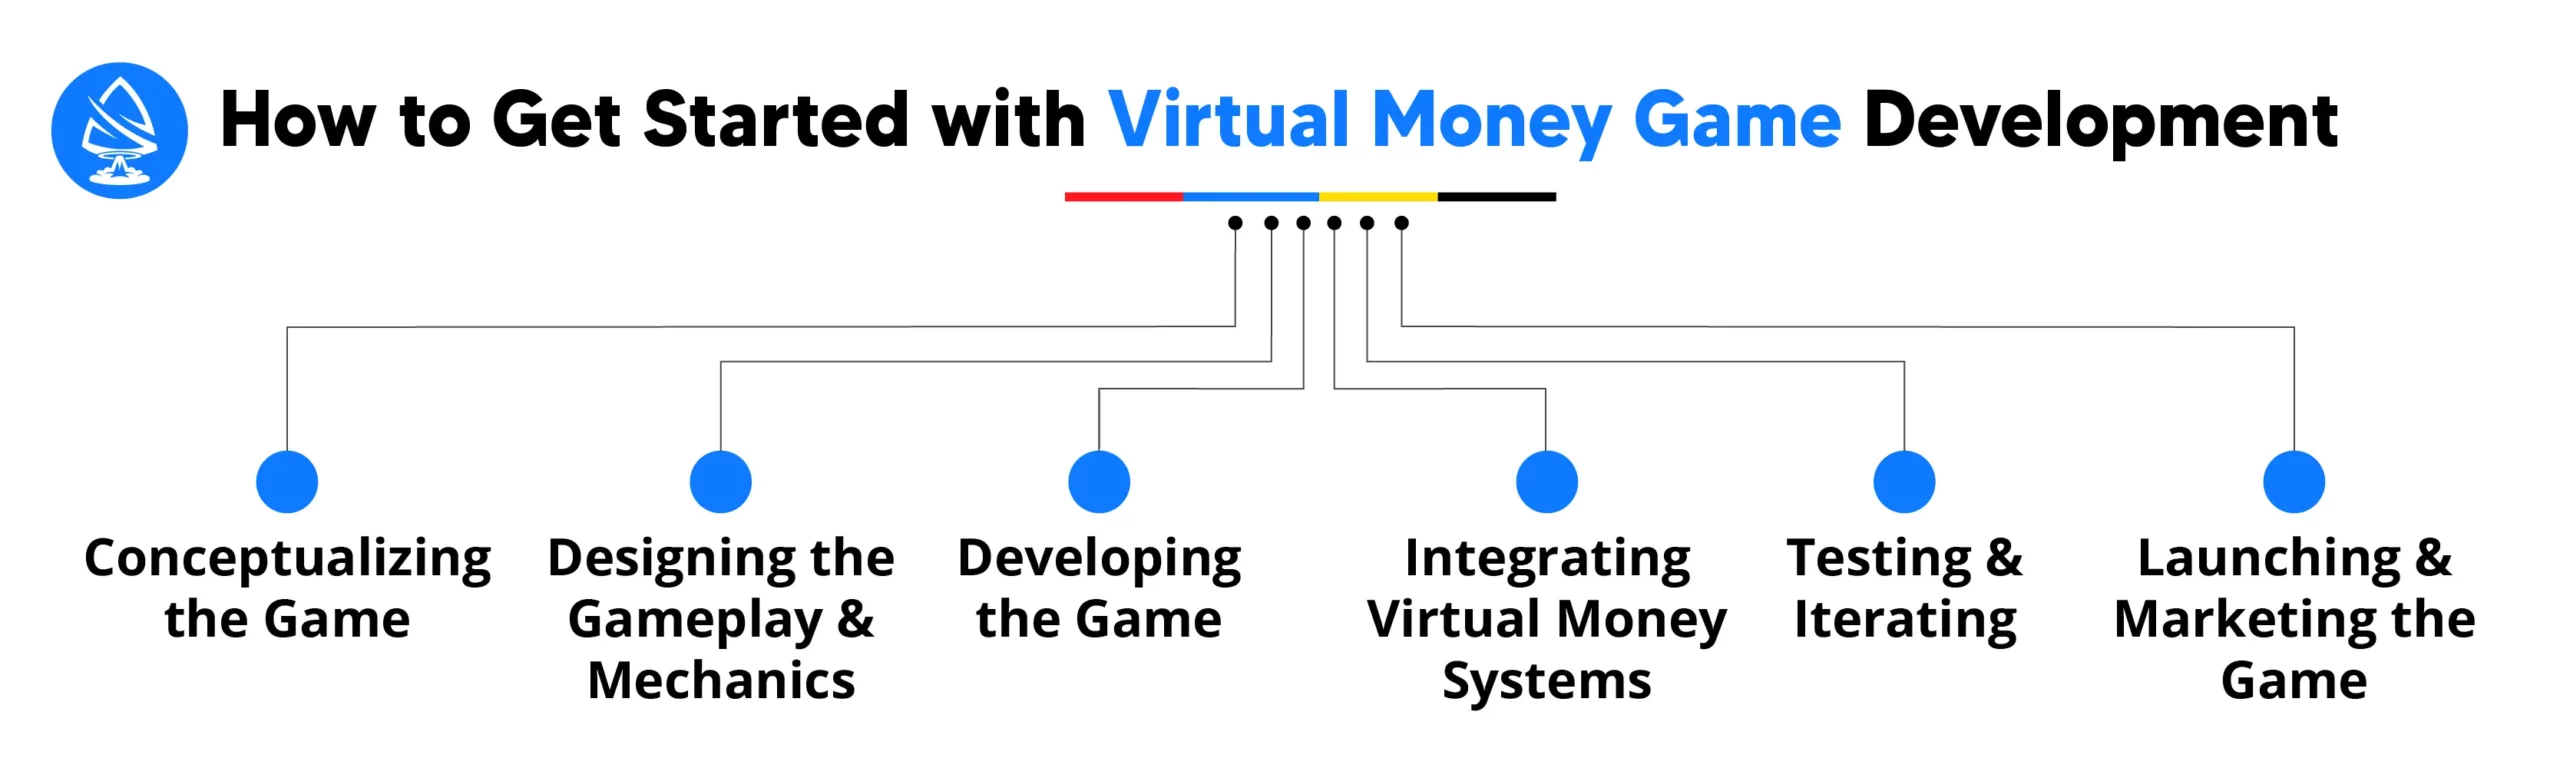 How to Get Started with Virtual Money Game App Development